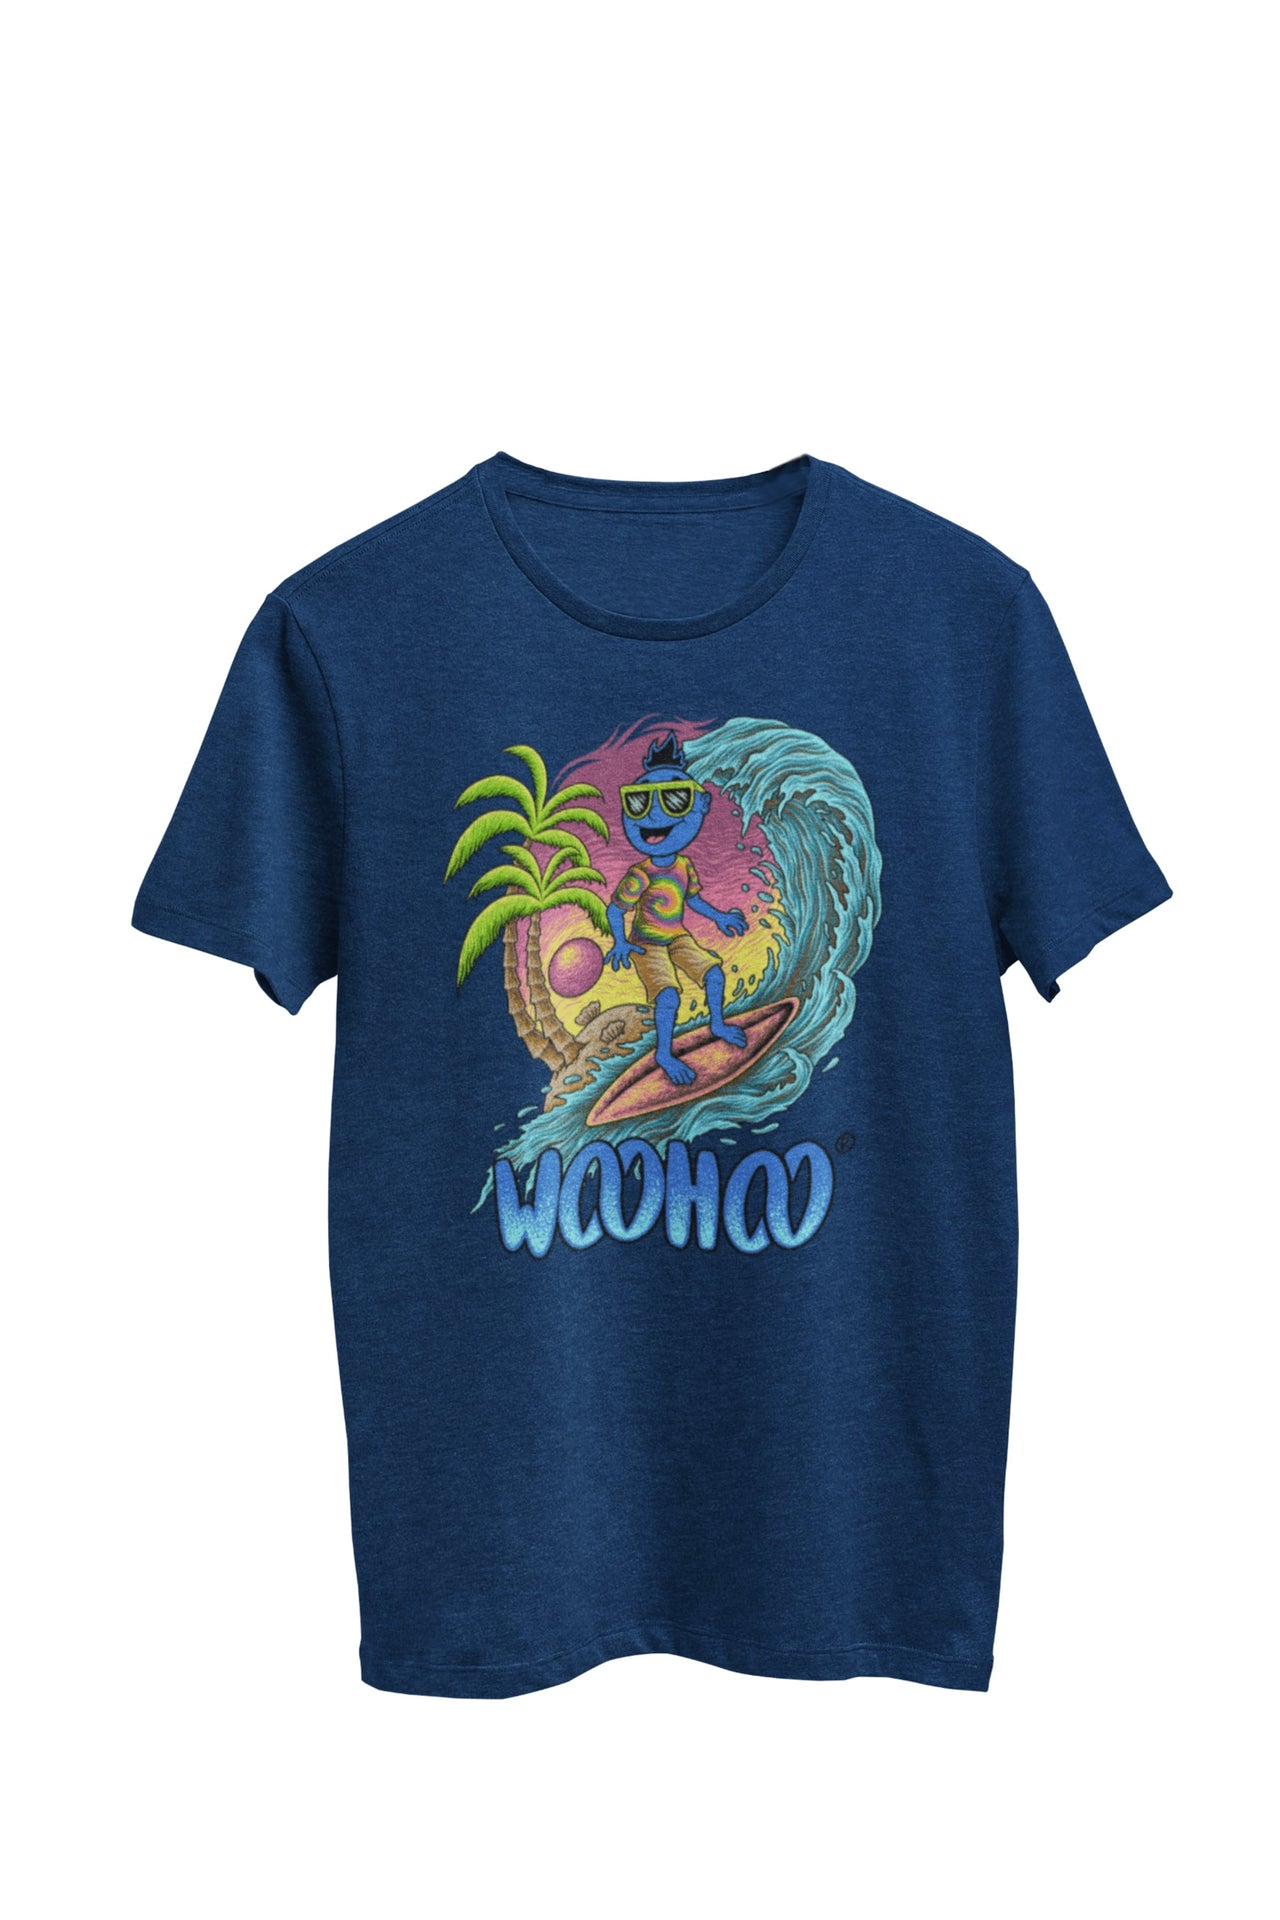 WooHooBerry fearlessly conquering a large wave while surfing, adorned in a vibrant tie-dye wetsuit. Embarking on an exhilarating outdoor sports escapade, their navy T-shirt exuberantly showcases the text 'WooHoo,' amplifying the excitement of the moment.